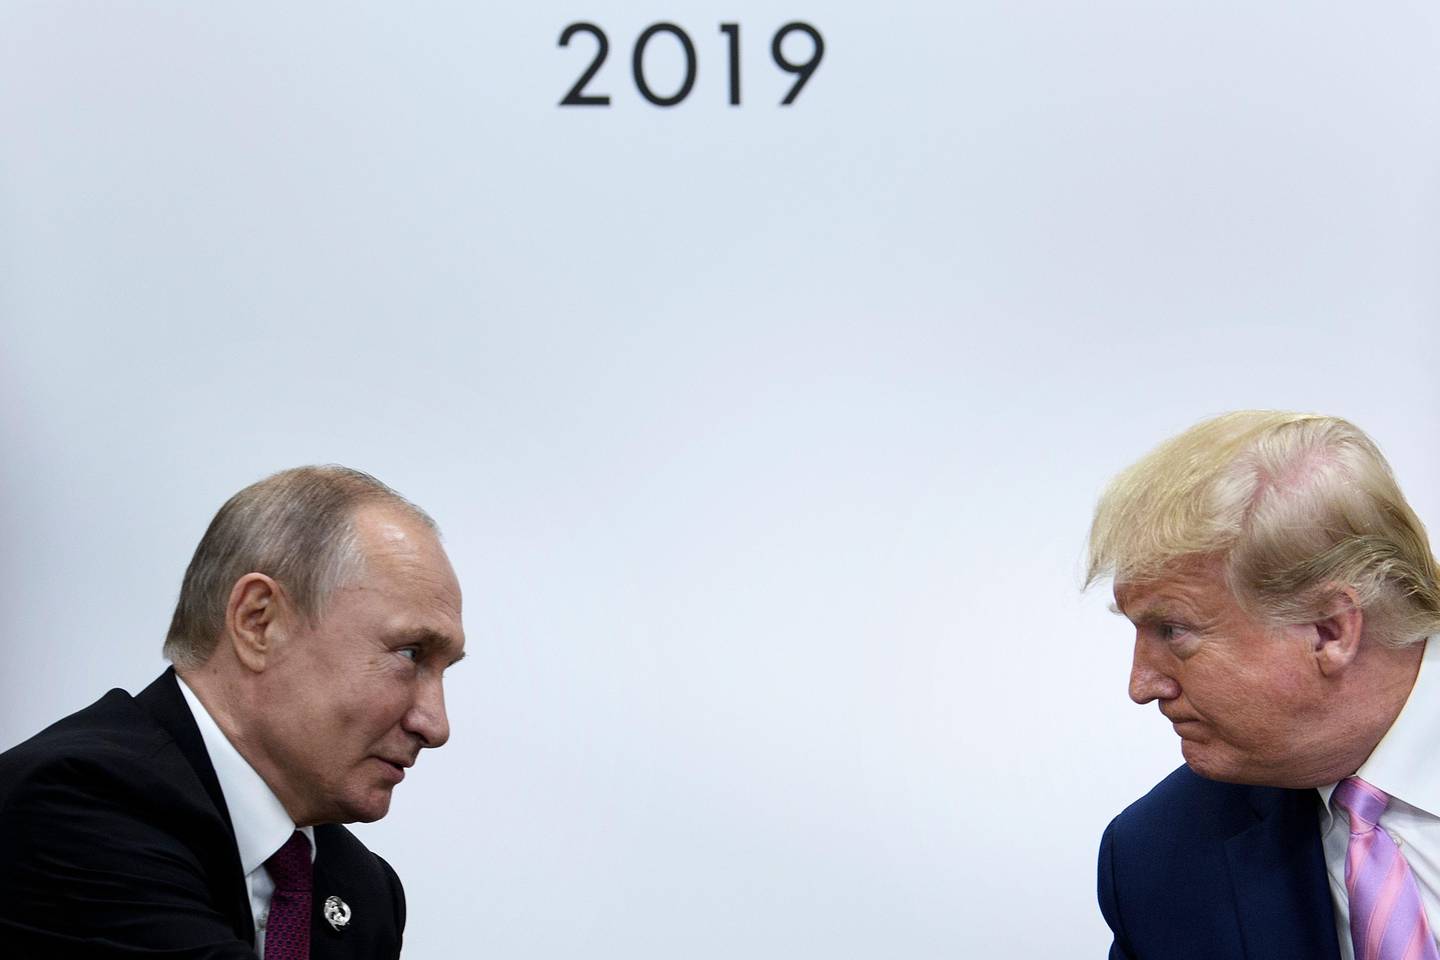 TOPSHOT - US President Donald Trump (R) attends a meeting with Russia's President Vladimir Putin during the G20 summit in Osaka on June 28, 2019. (Photo by Brendan Smialowski / AFP)